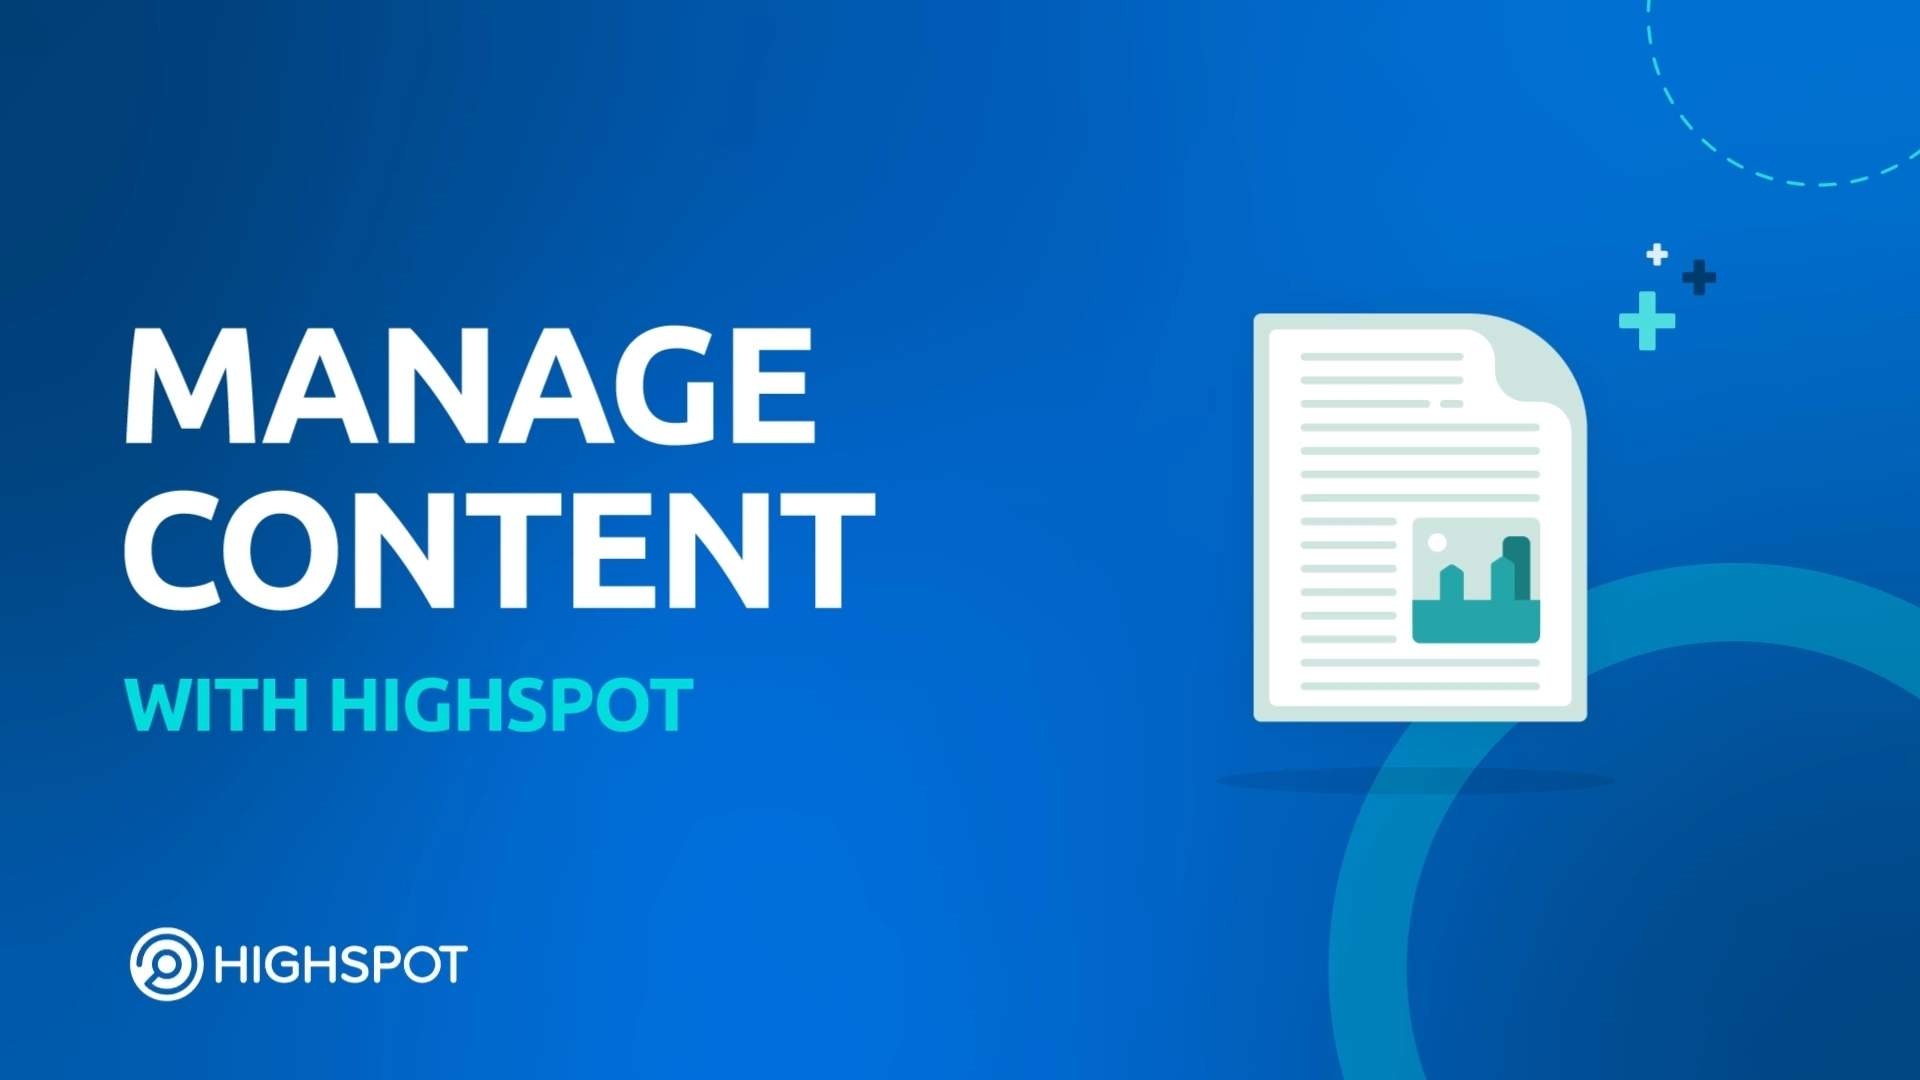 Highspot in Action - Manage Content